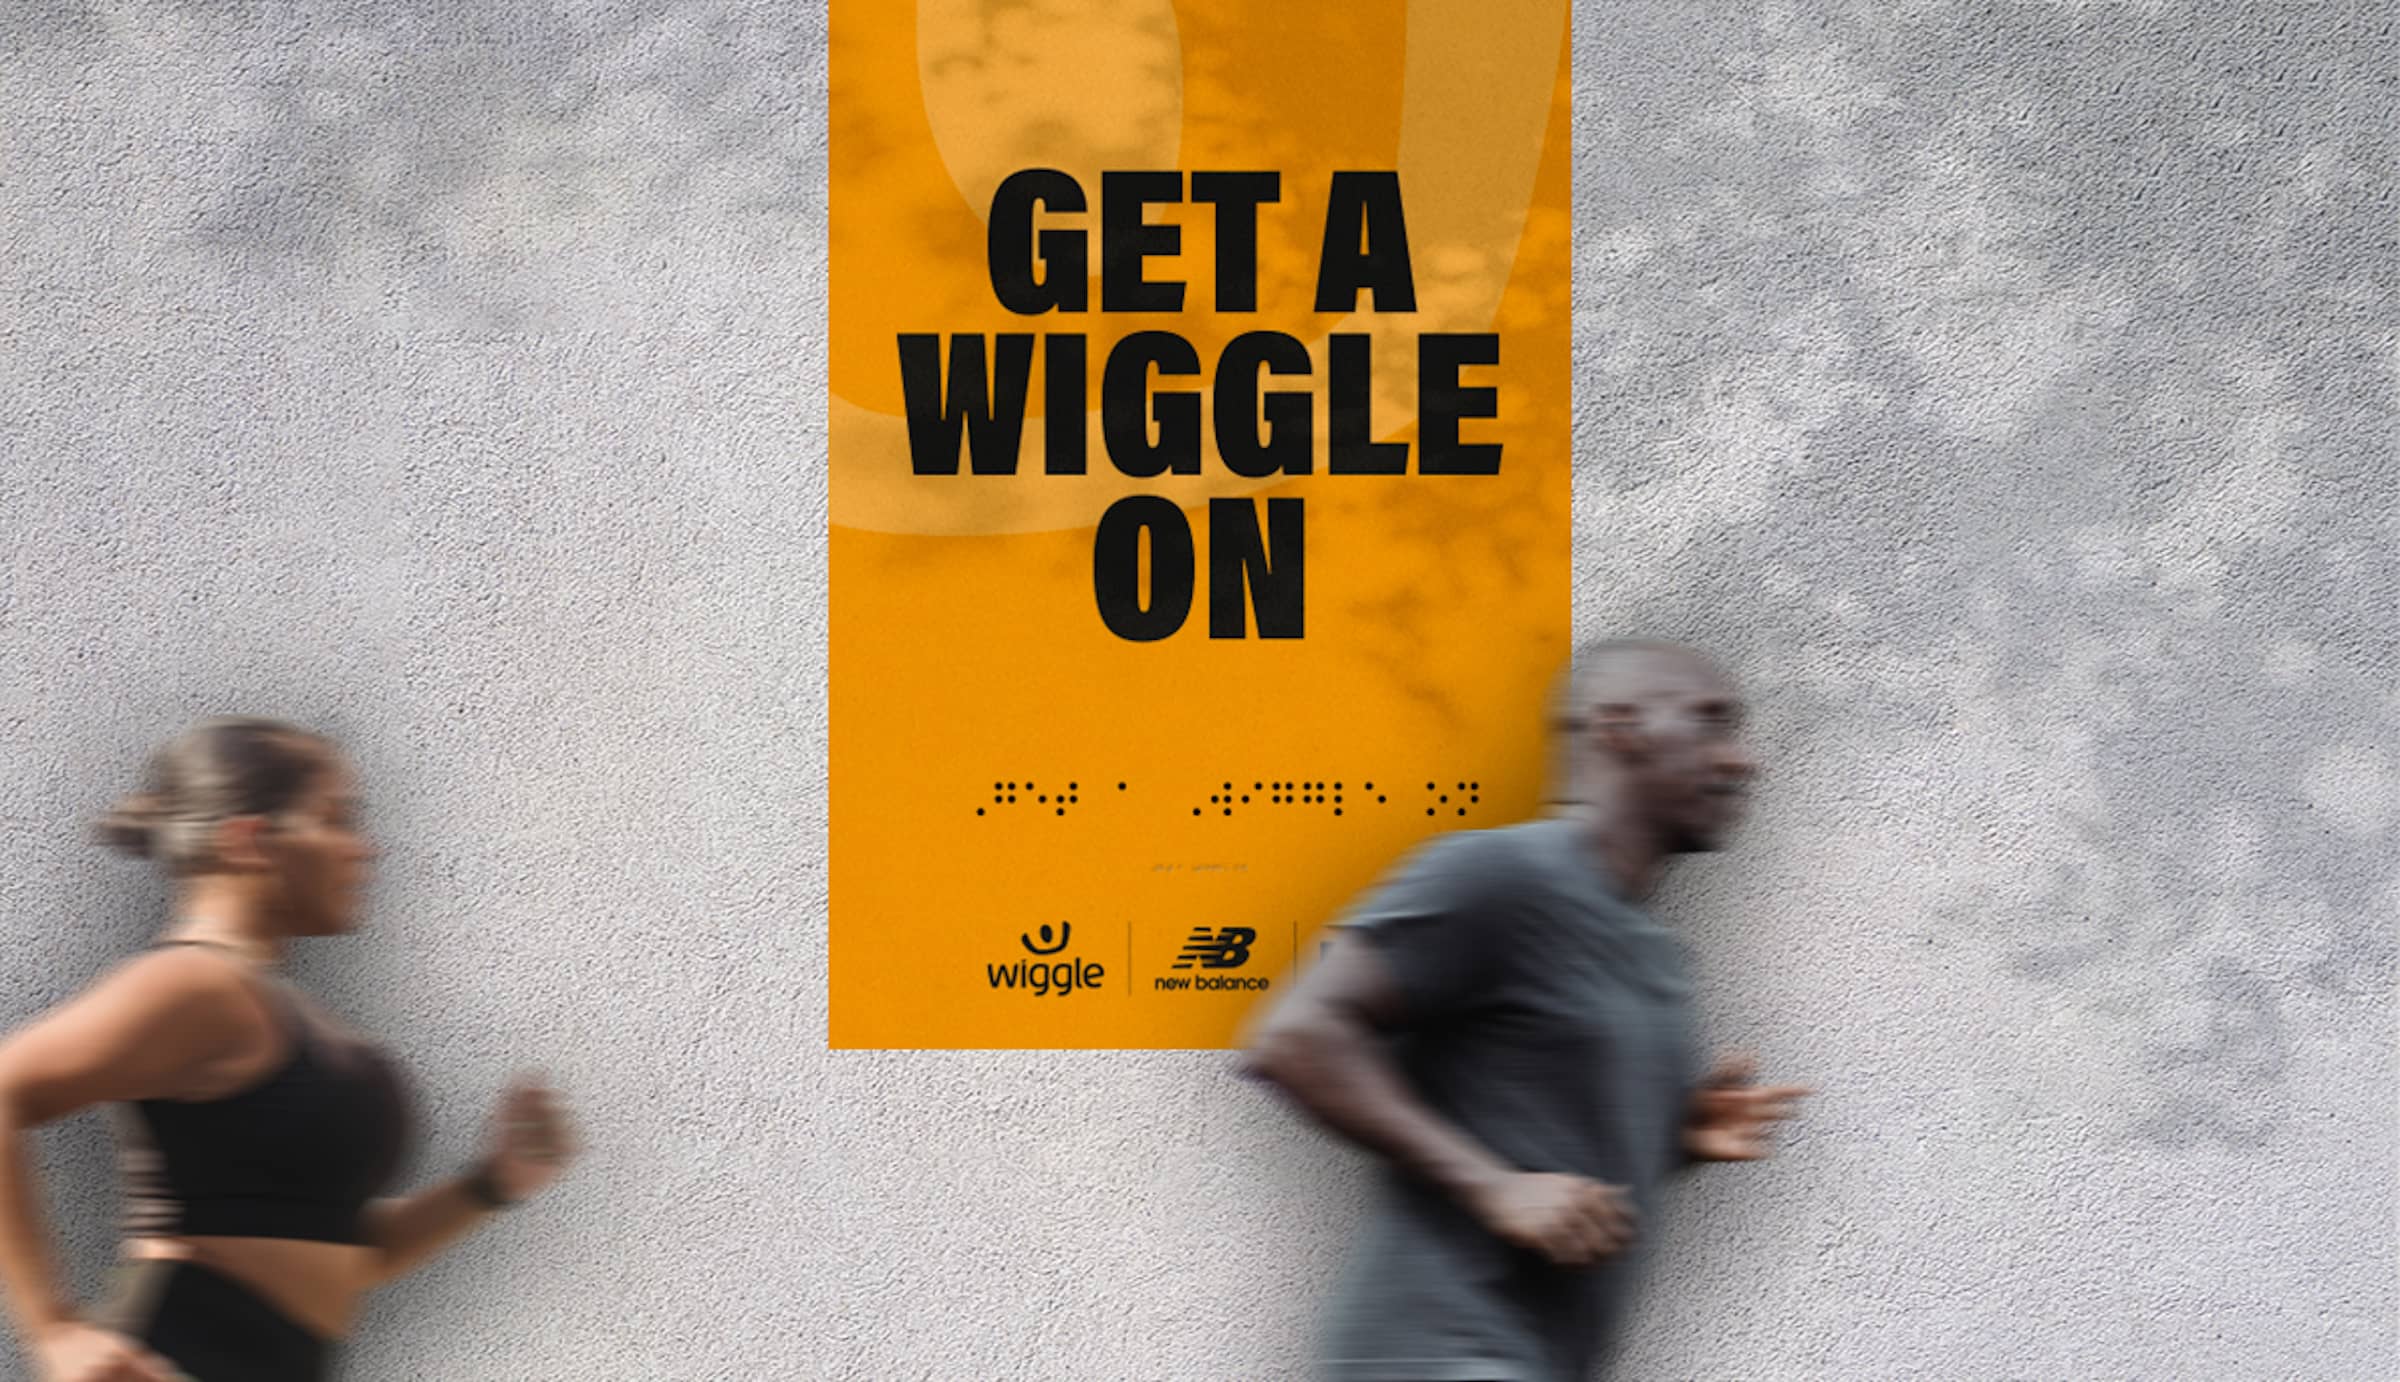 Wiggle x new balance braille banners